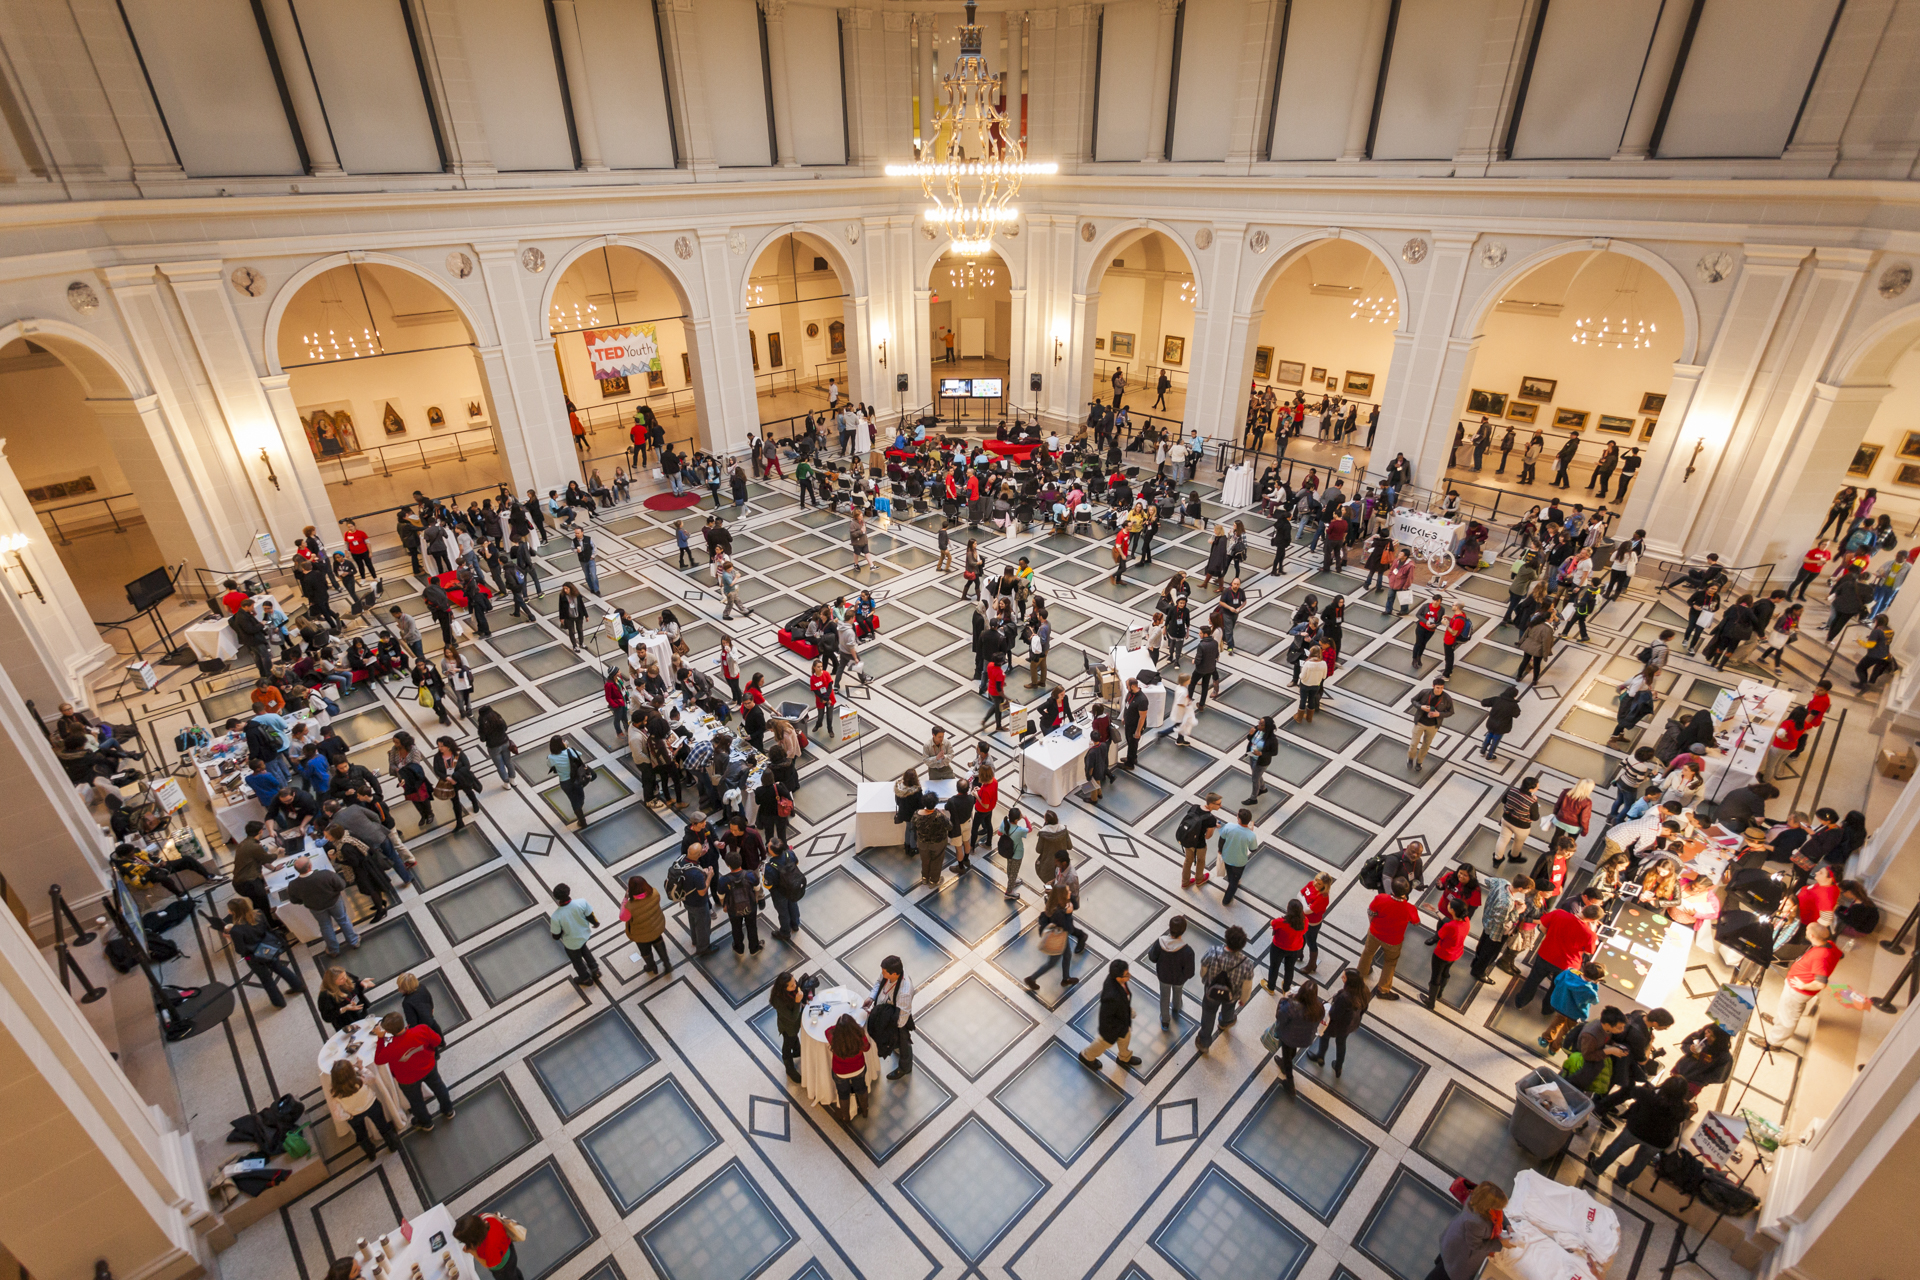 At the Brooklyn Museum in New York City, 550 middle and high school students came together for TEDYouth 2014. Photo: Ryan Lash/TED